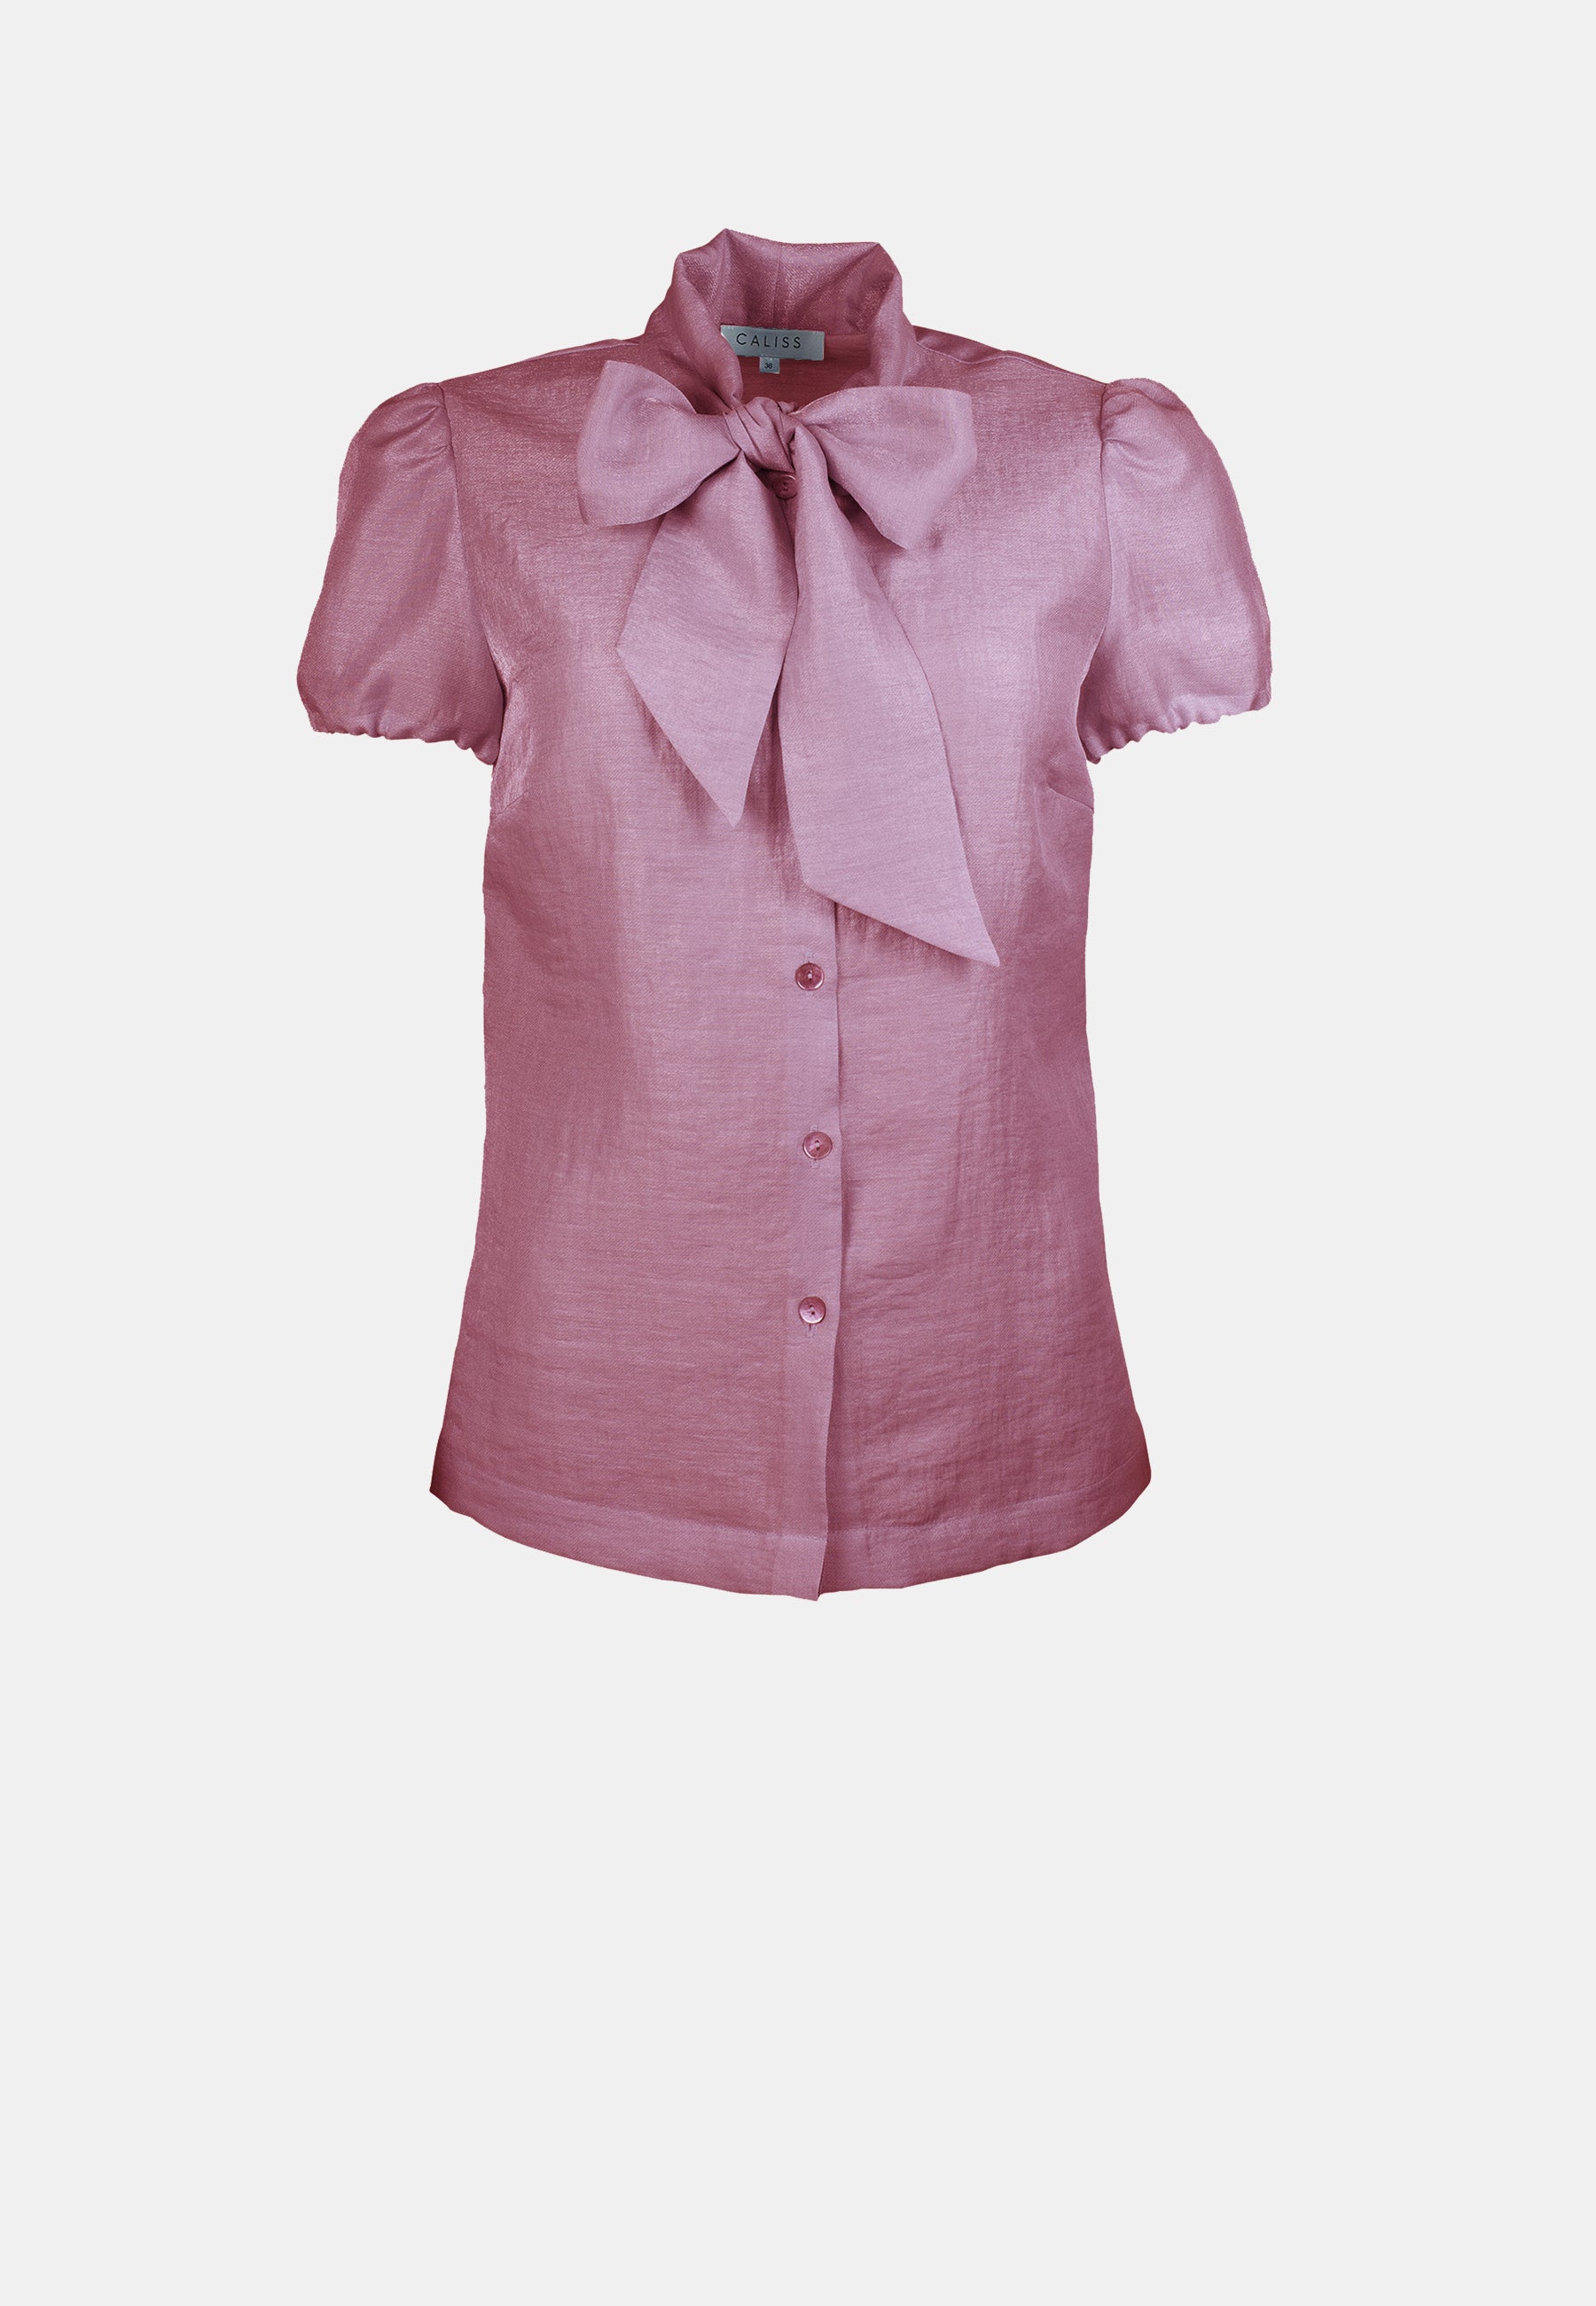 Blouse Anna in orchid pink